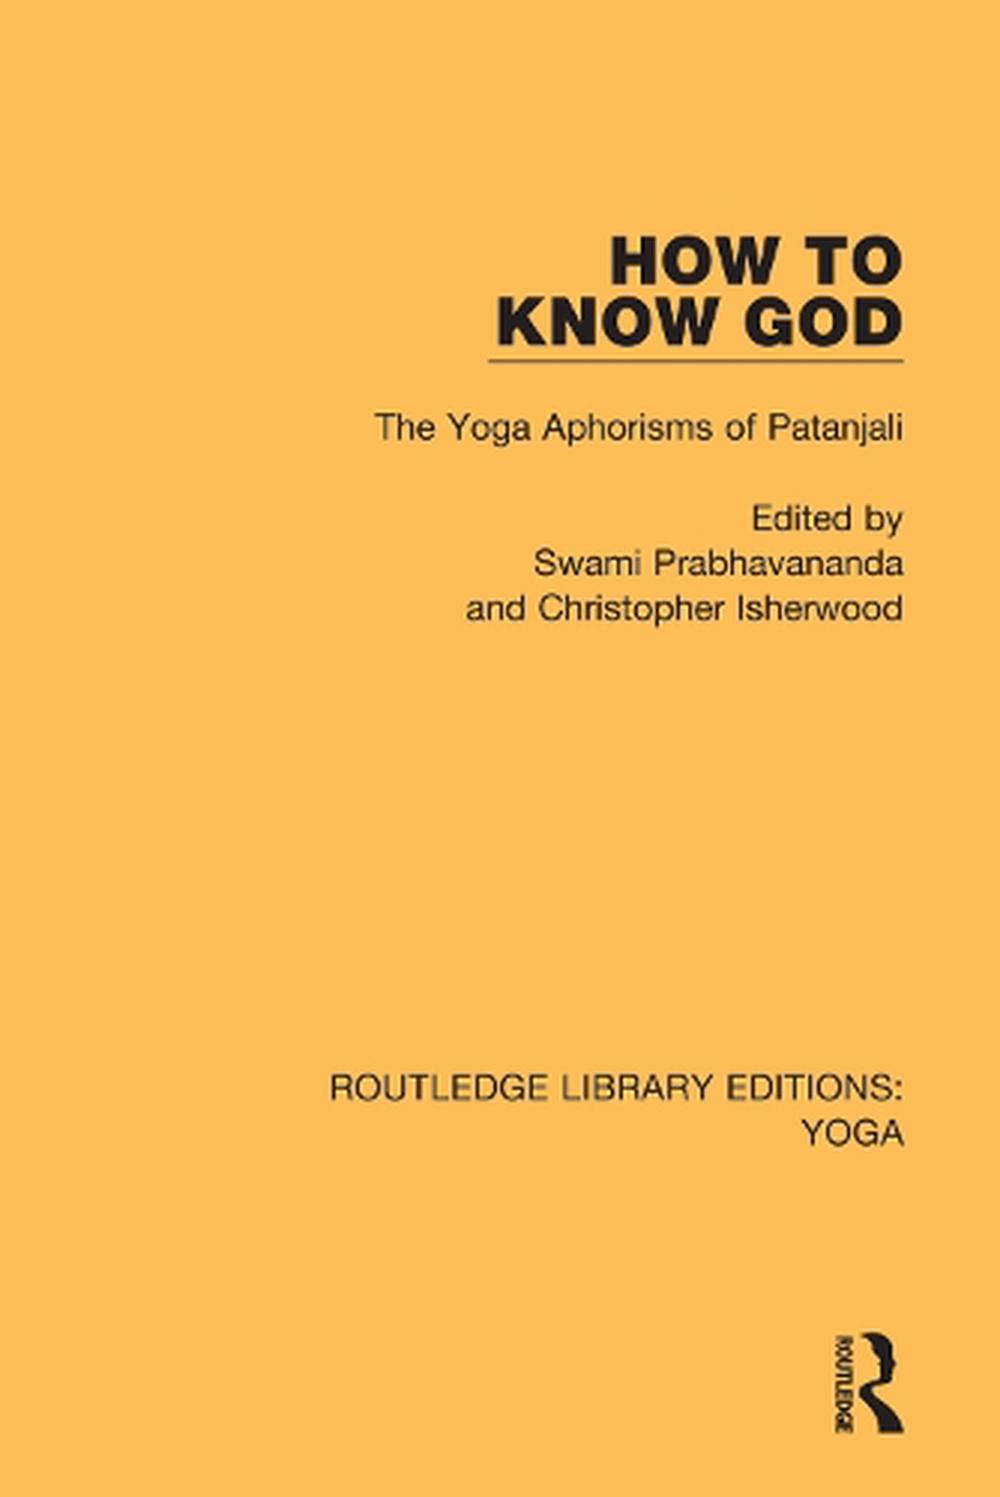 How to Know God The Yoga Aphorisms of Patanjali Paperback Book Free Shipping! 9780367025892 eBay